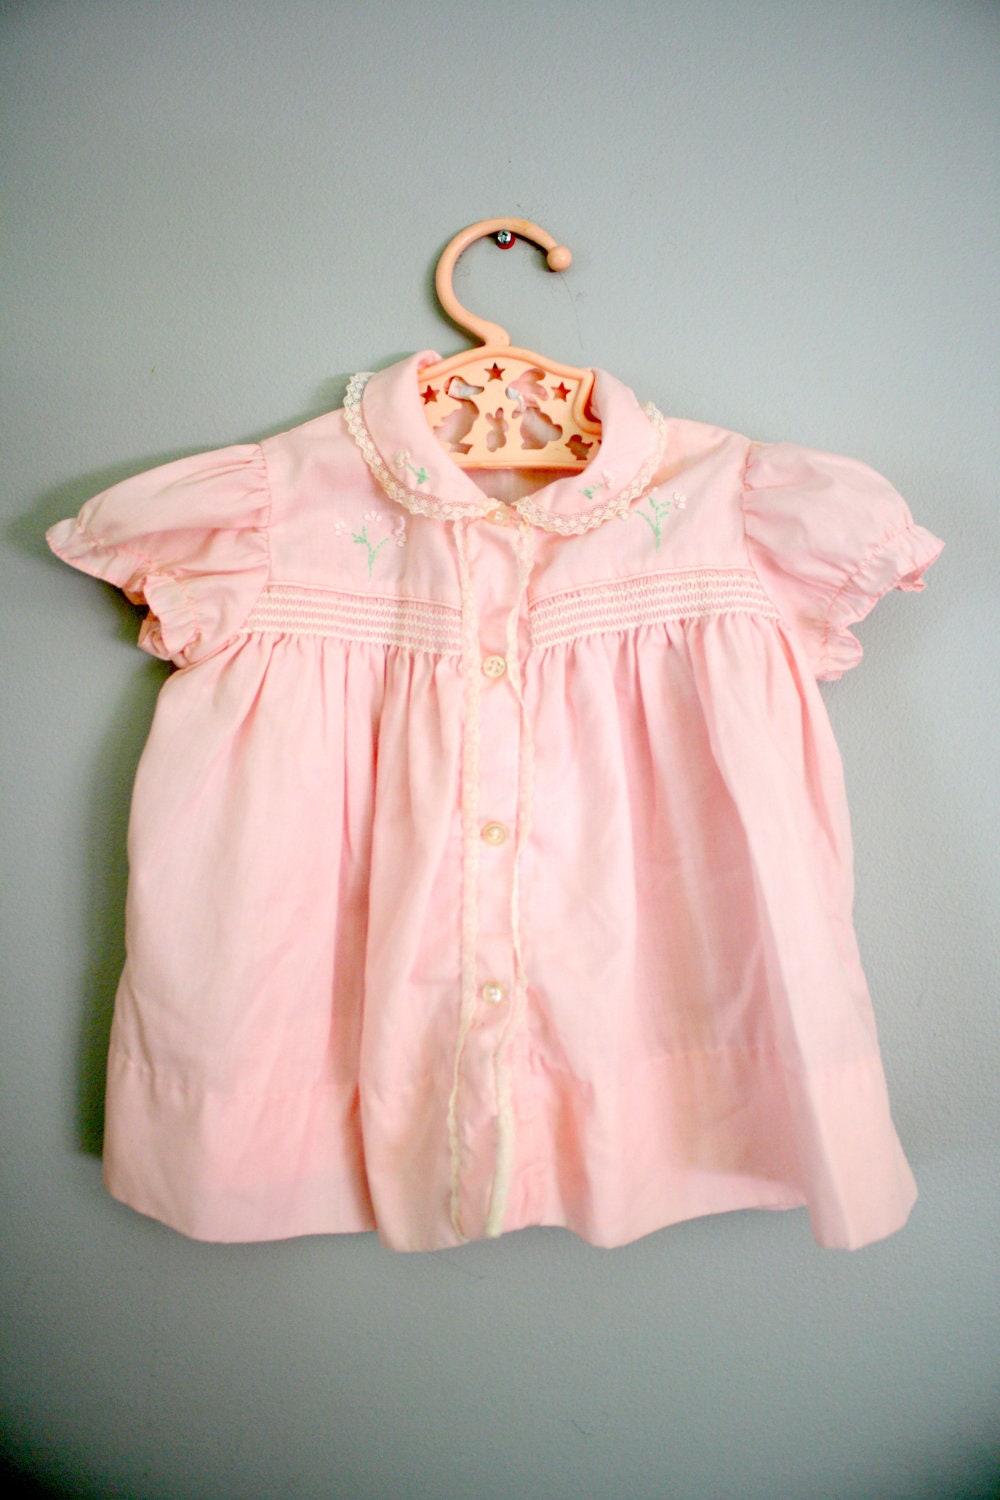 60s 70s Pink Smocked Button Down Dress Sz 9-12 months - babyshapes